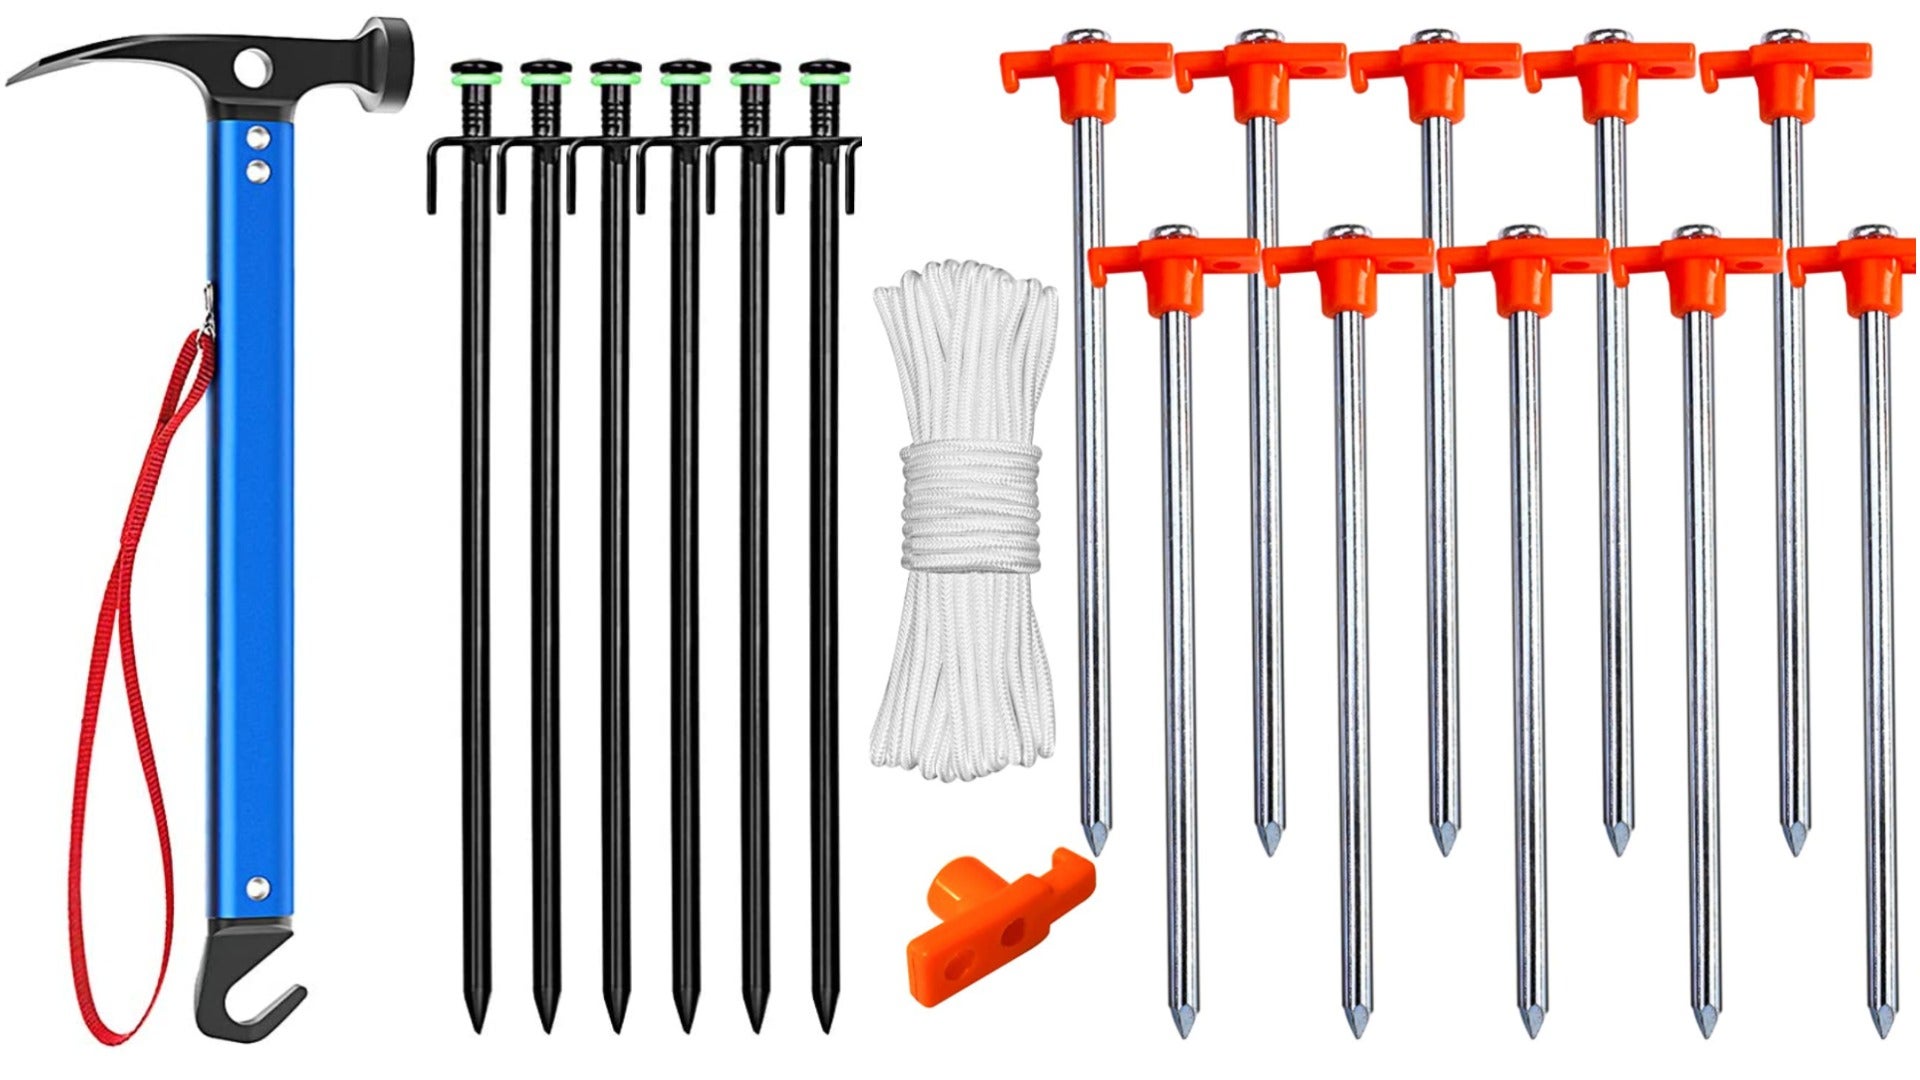 Zconmotarich Tent Stakes Ground Anchor Pegs Heavy Duty Outdoor Screw Style Spiral 12Pcs/Set 